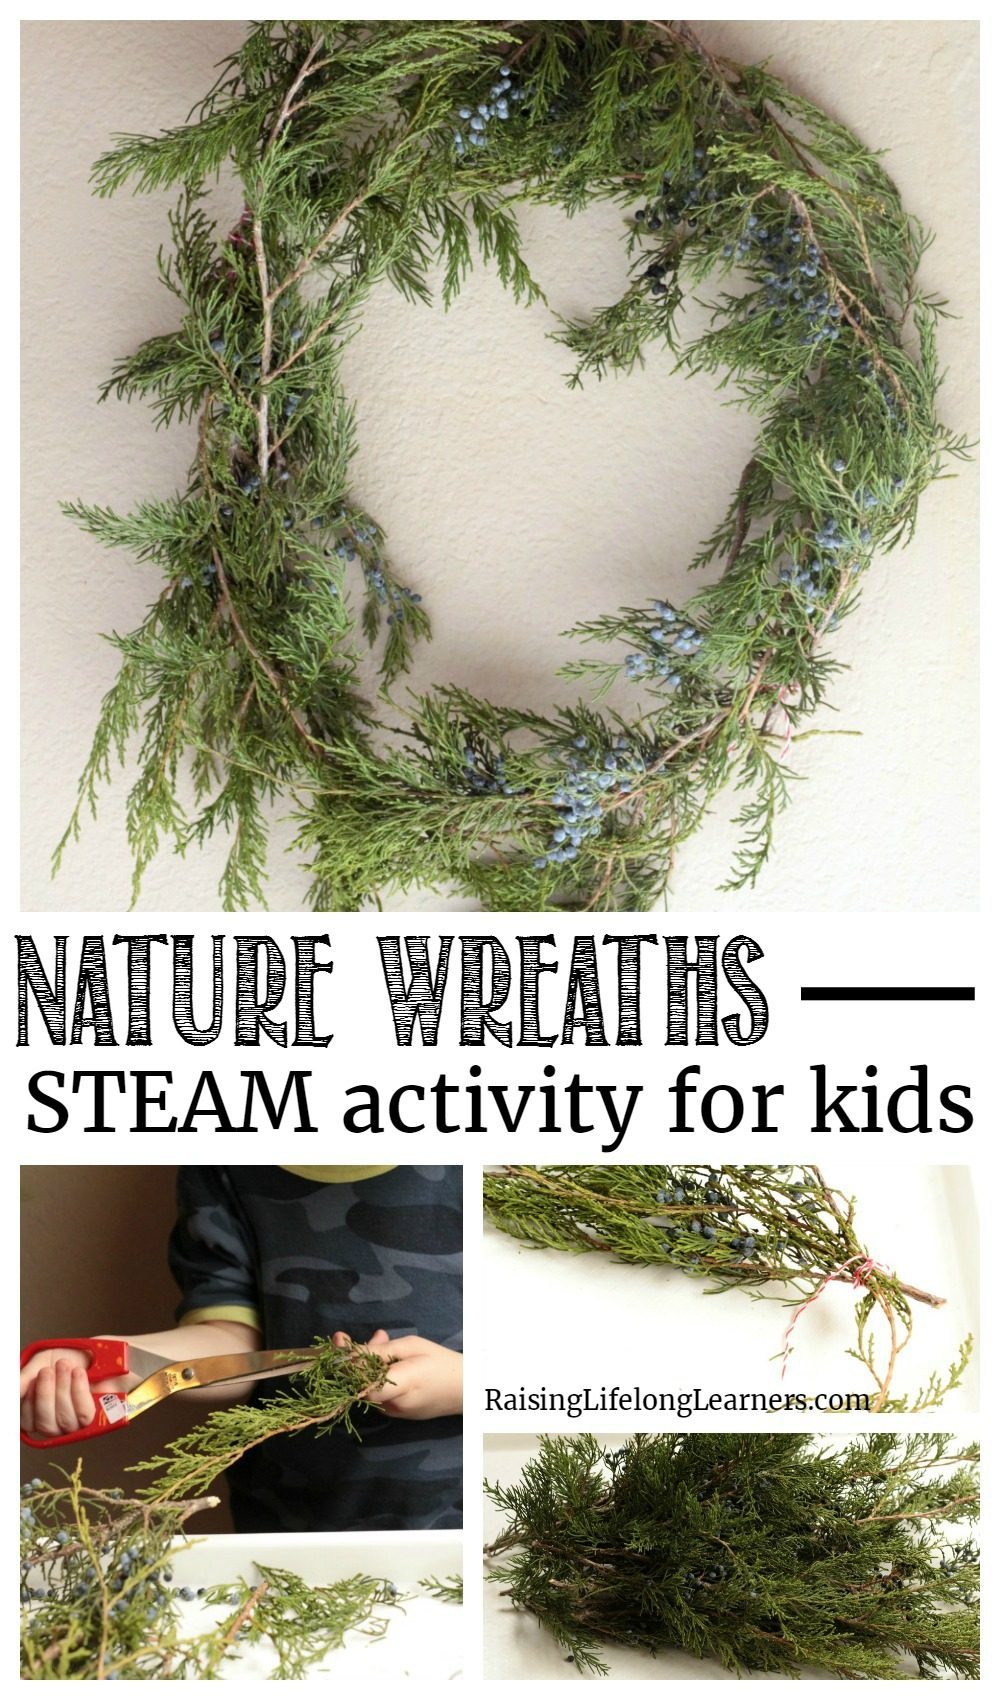 Explore nature, botany, and art all at the same time in this nature wreaths STEAM activity for kids! Explore winter and learn!